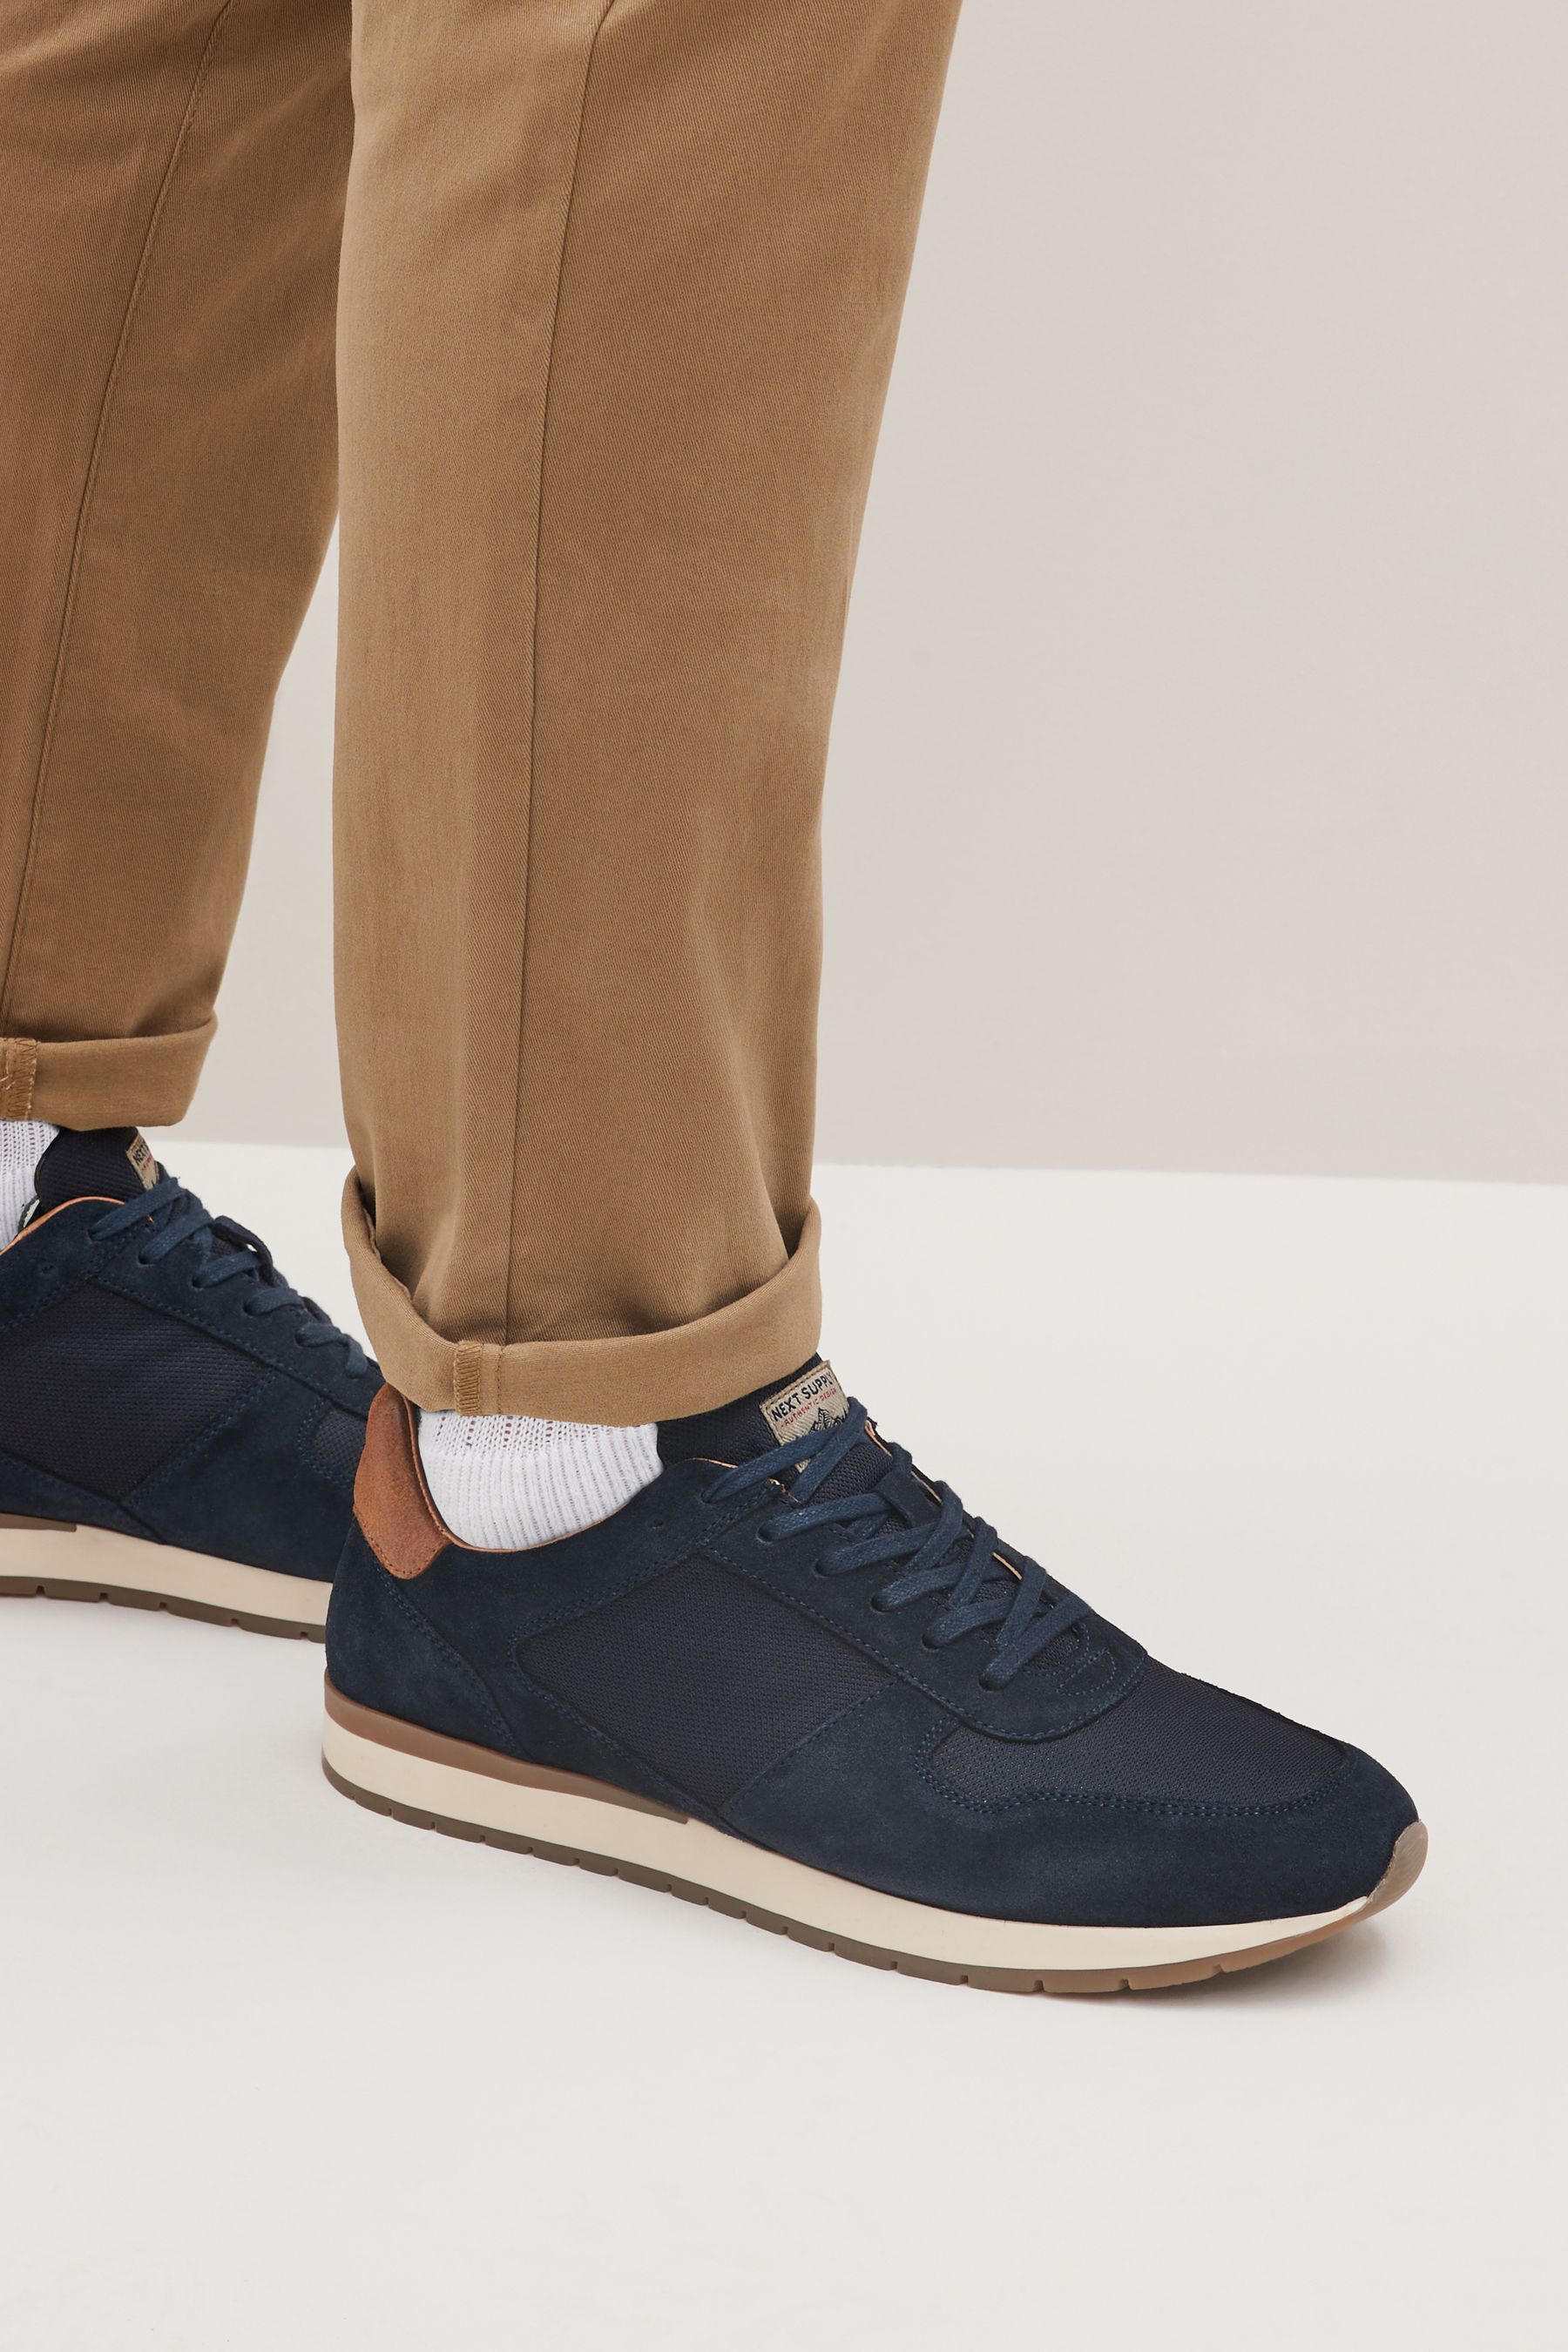 Buy Navy Suede Trainers from the Next UK online shop